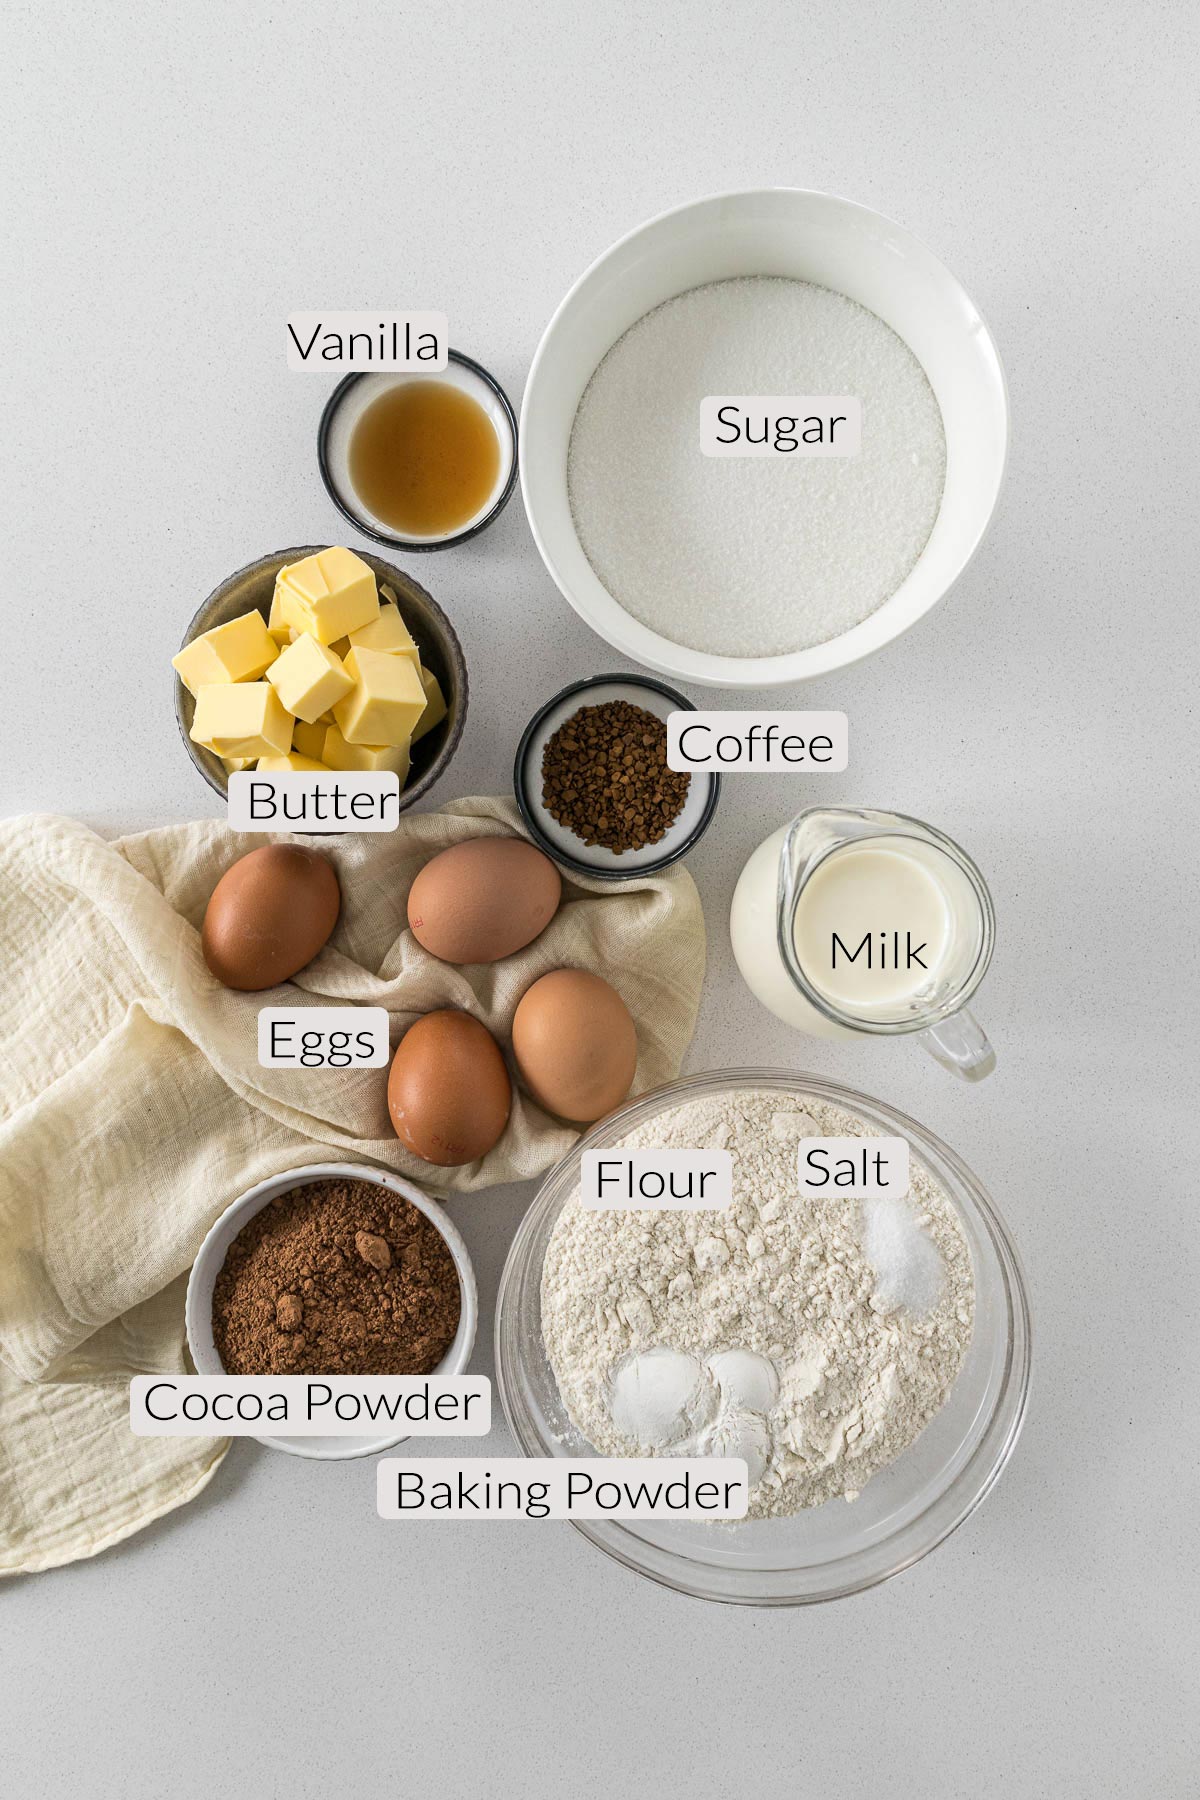 Chocolate layer cake ingredients.